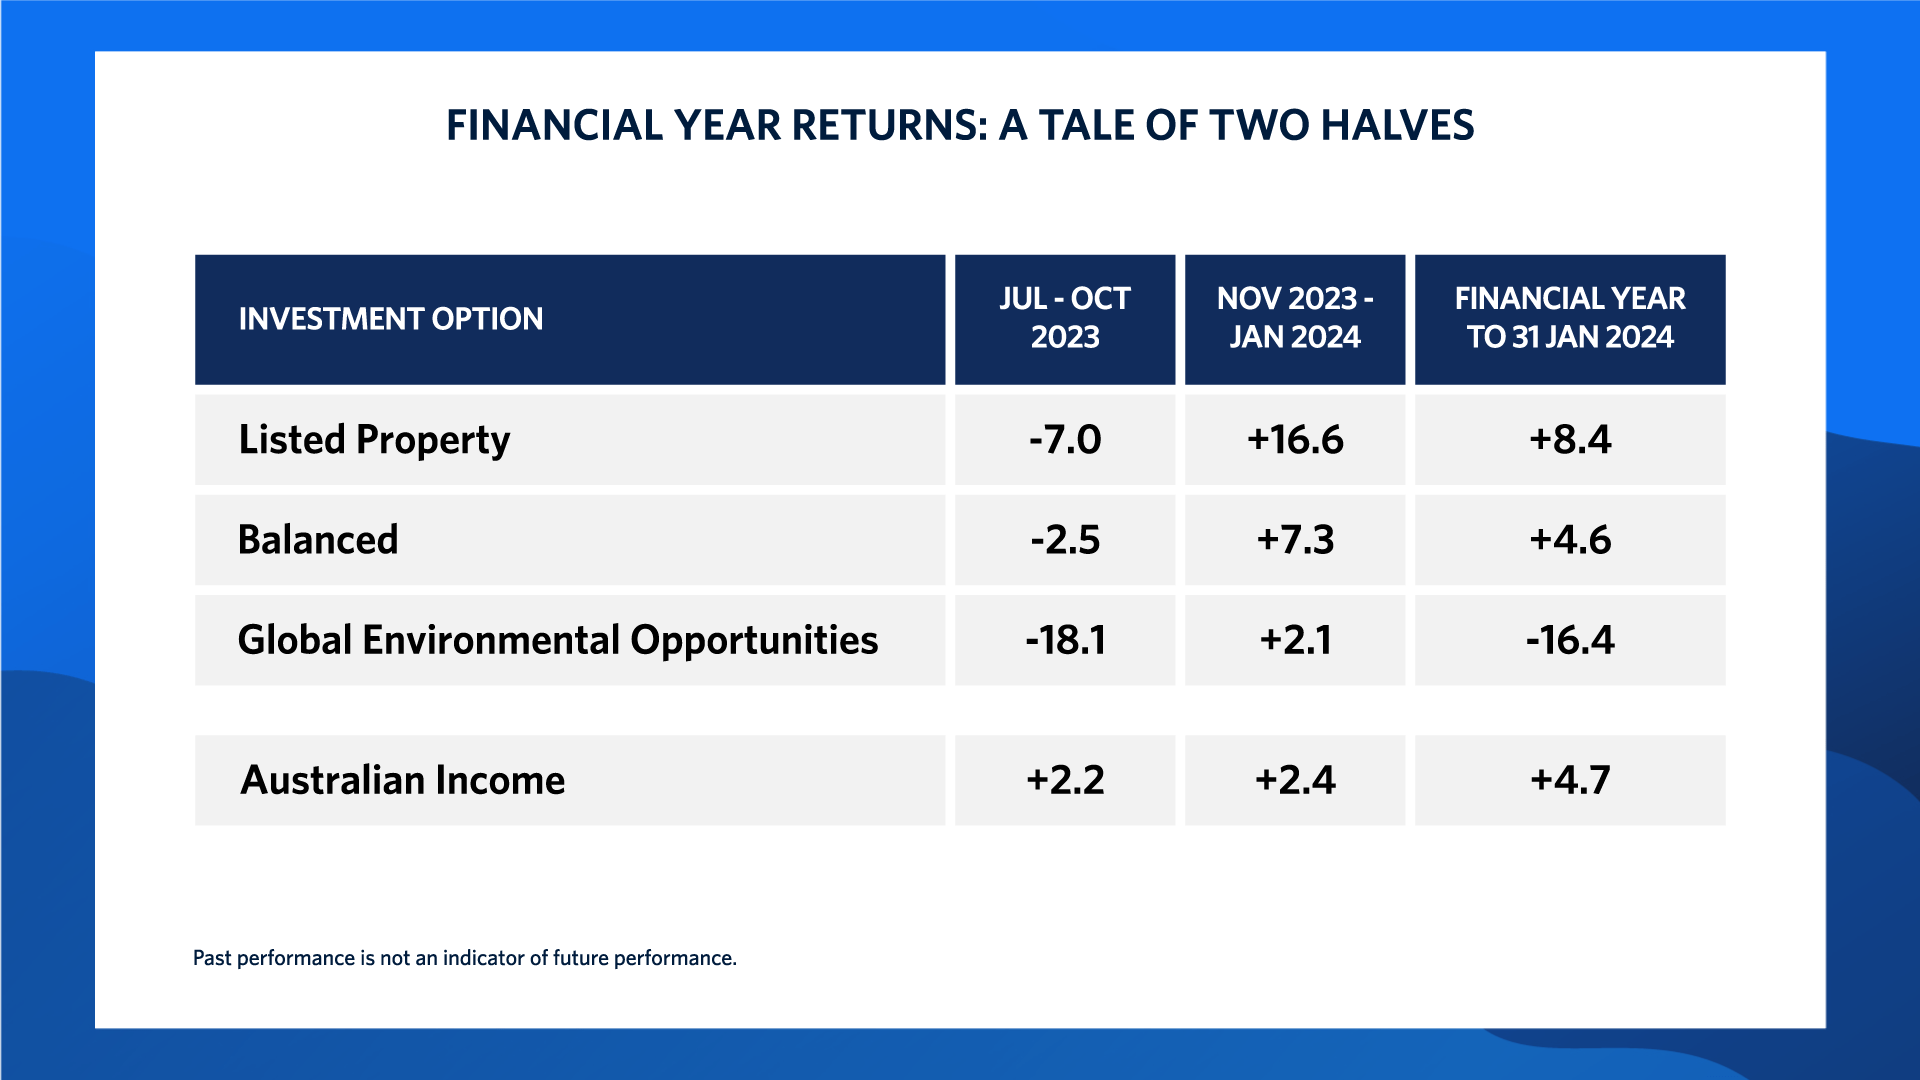 Chart 2: A table shows the performance of UniSuper’s Listed Property, Balanced, Global Environmental Opportunities, and Australian Income investment options between the following periods: July 2023 to October 2023; November 2023 to January 2024; the financial year to 31 January 2024.